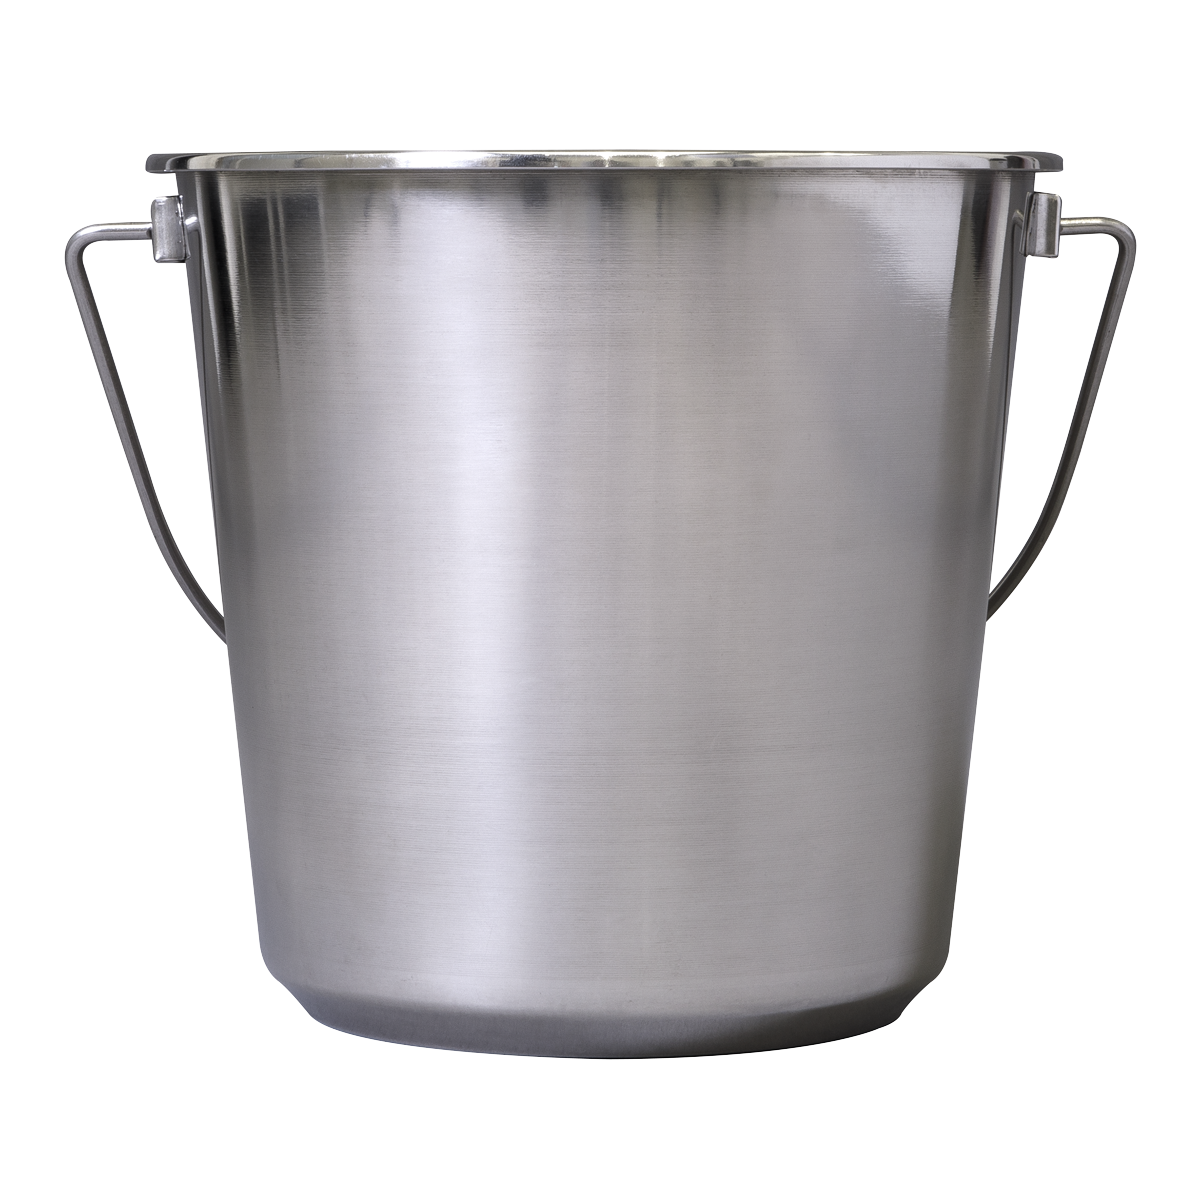 Mop Bucket 12L - Stainless Steel Image 1